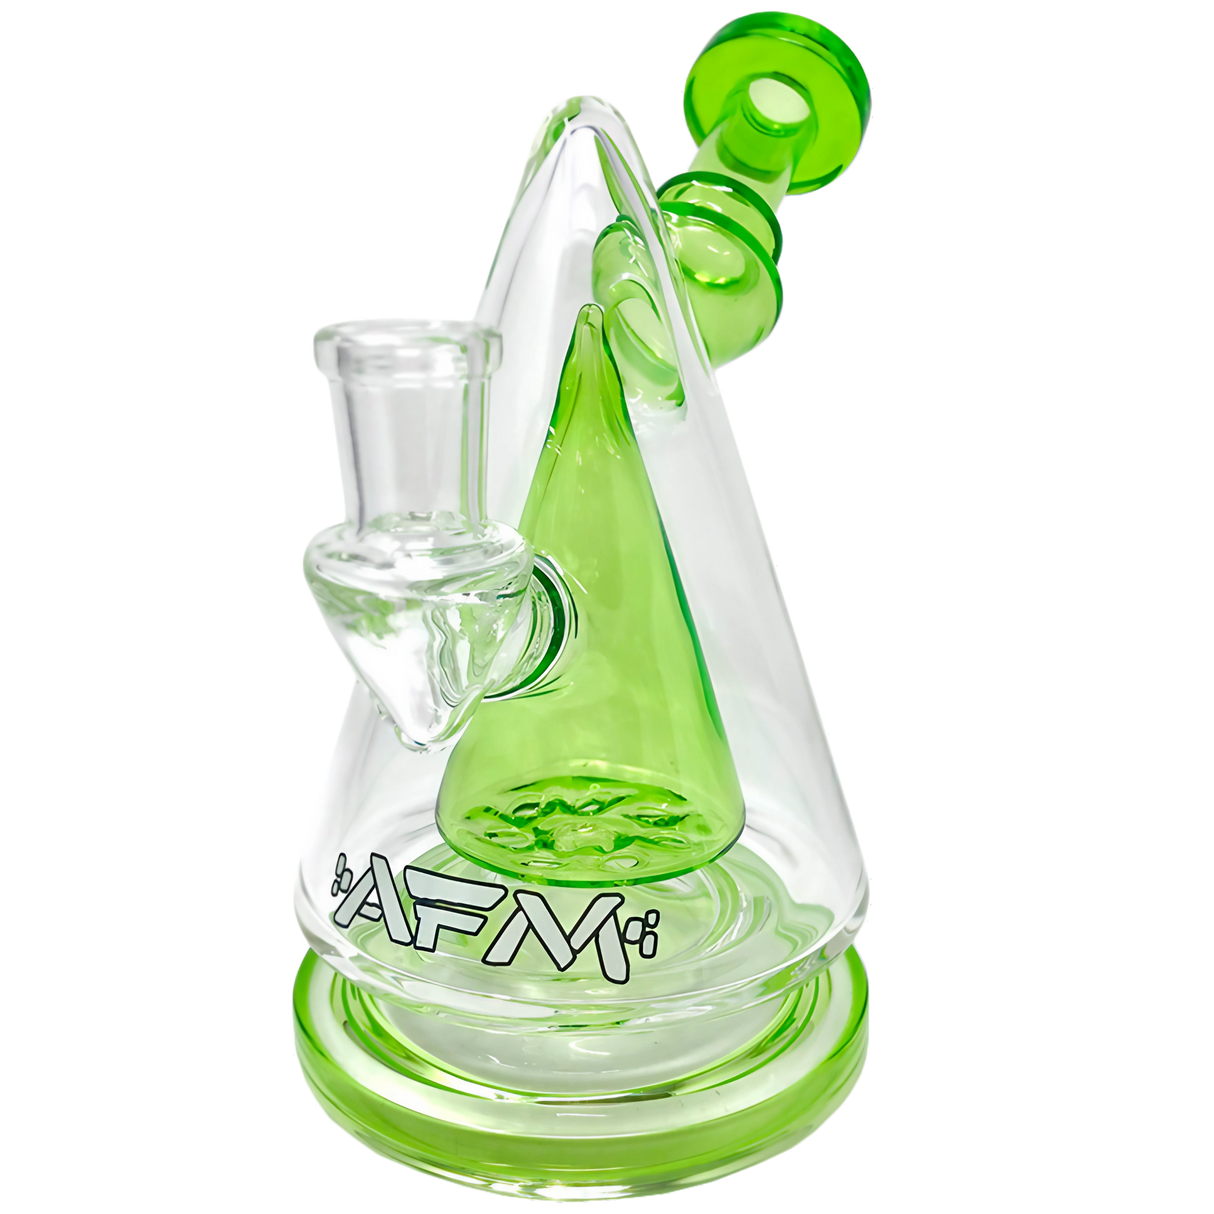 AFM Glass - The Cone Head Rig in Green - 7" Banger Hanger Dab Rig with Percolator - Front View